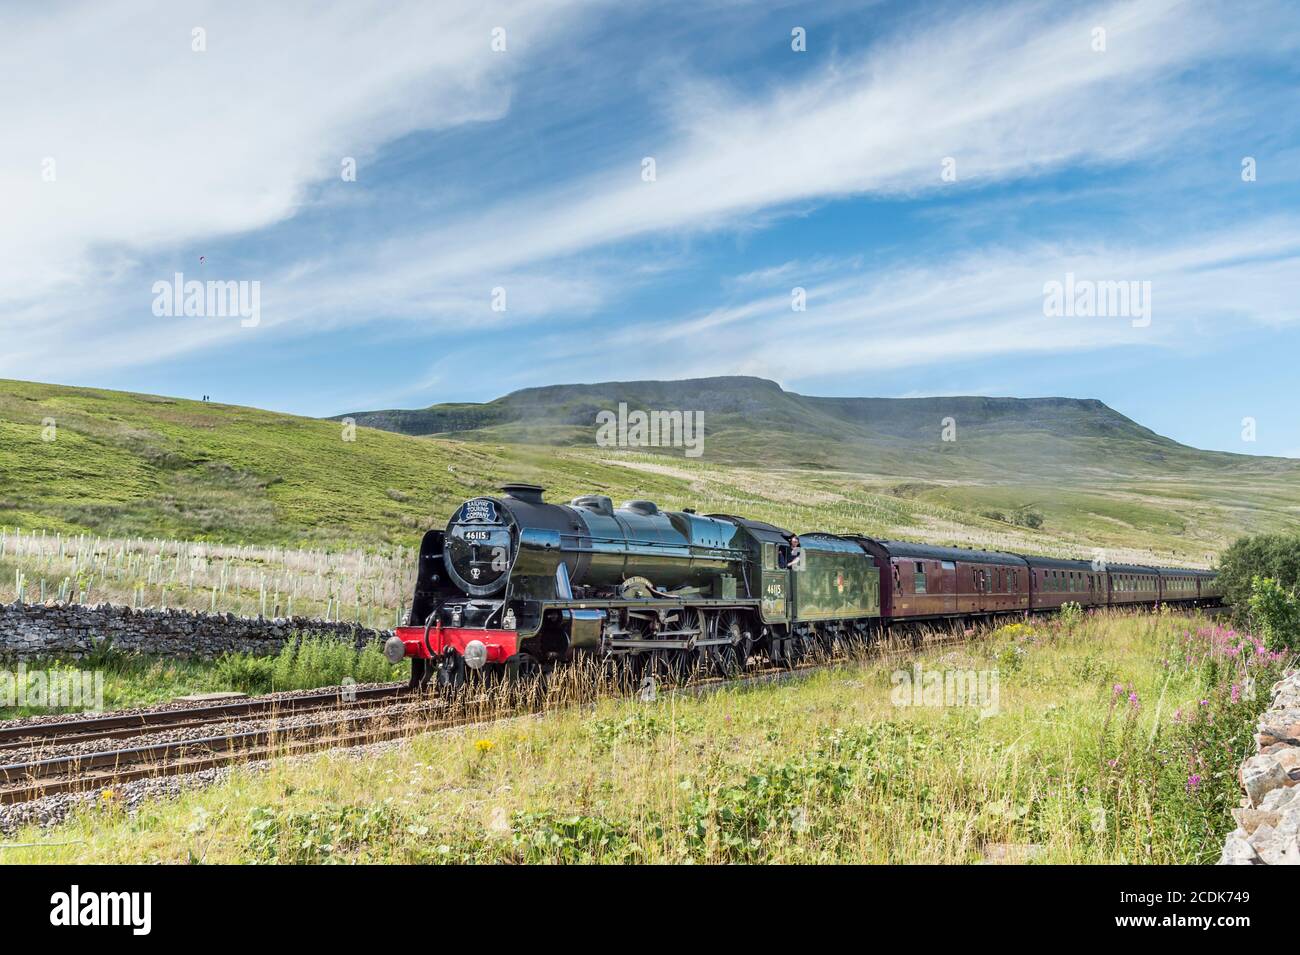 This is the LMS Royal Scot Class 7P 4-6-0 46115 Scots Guardsman passenger steam train approaching Aisgill summit on the Settle to Carlisle Line Stock Photo